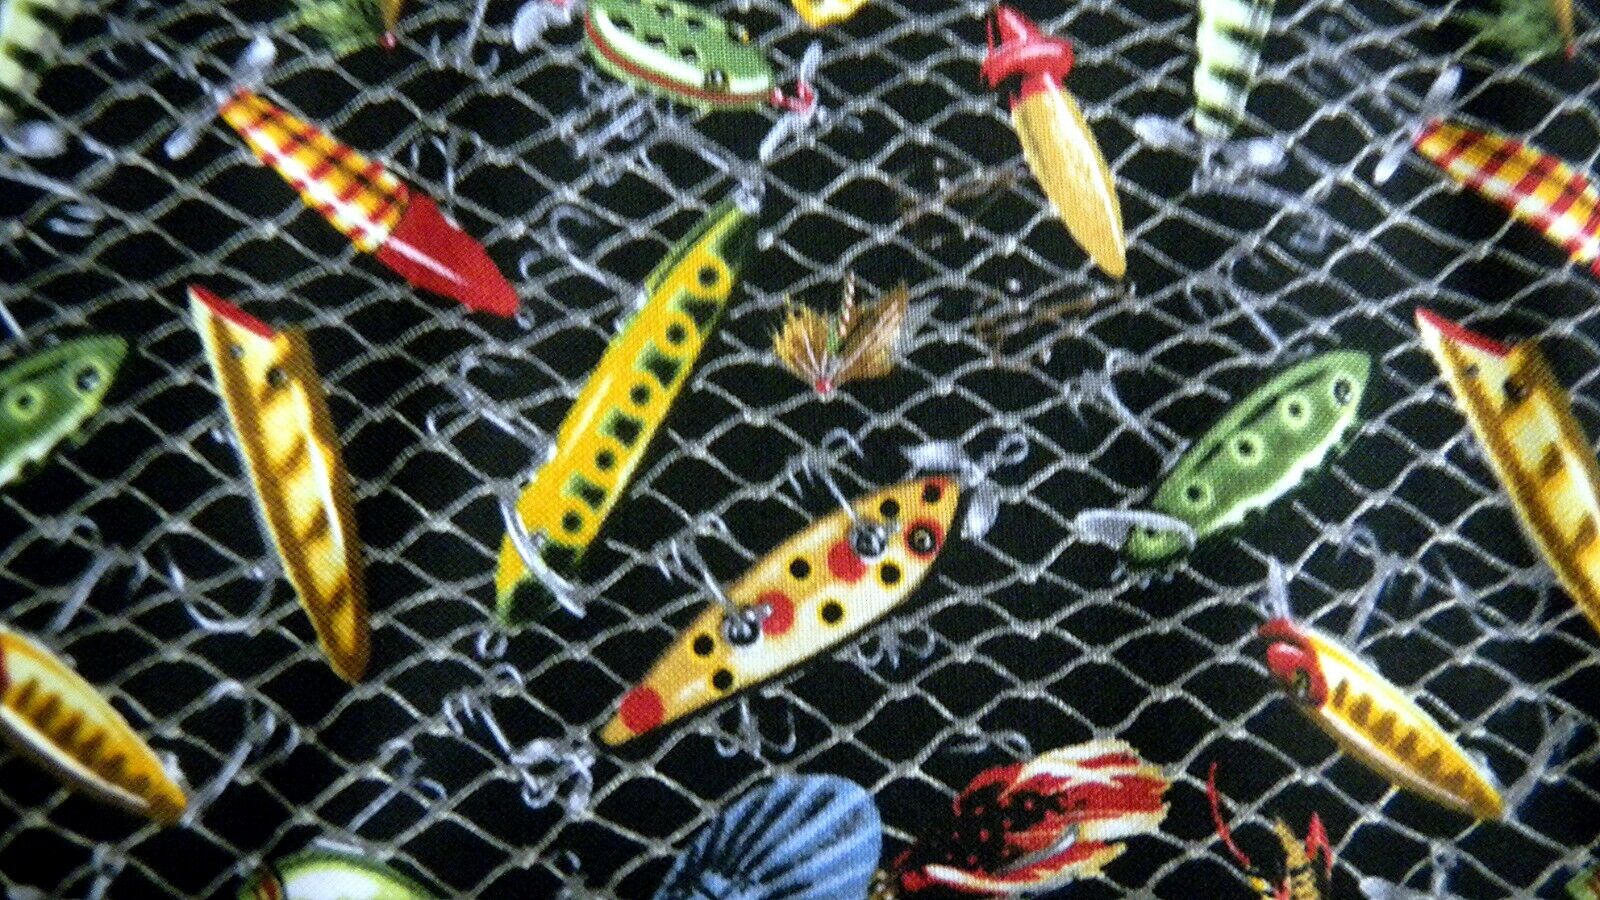 Fishing Tackle Fishing Lures Tackle Box Anglers Fish Netting Mens Quilt Fabric